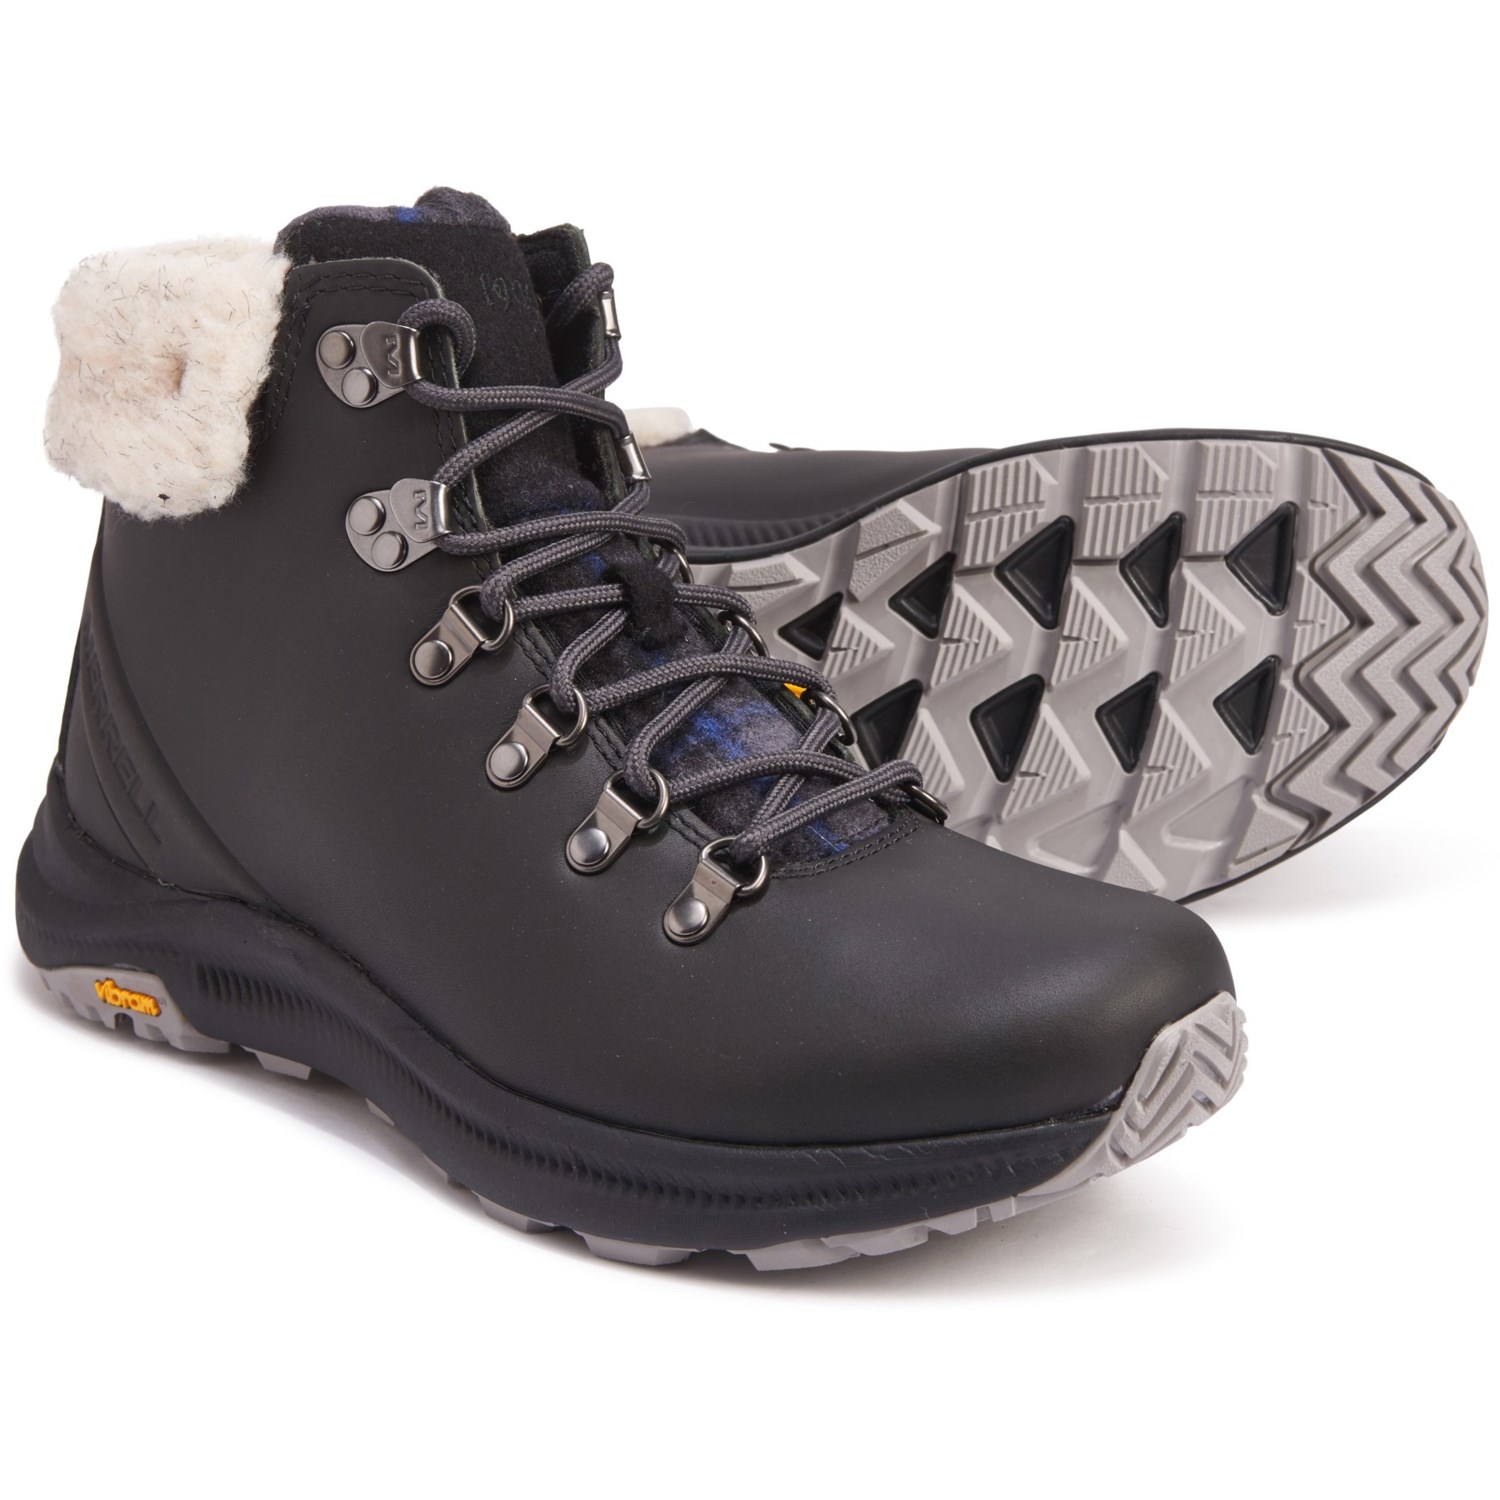 merrell leather hiking boots women's